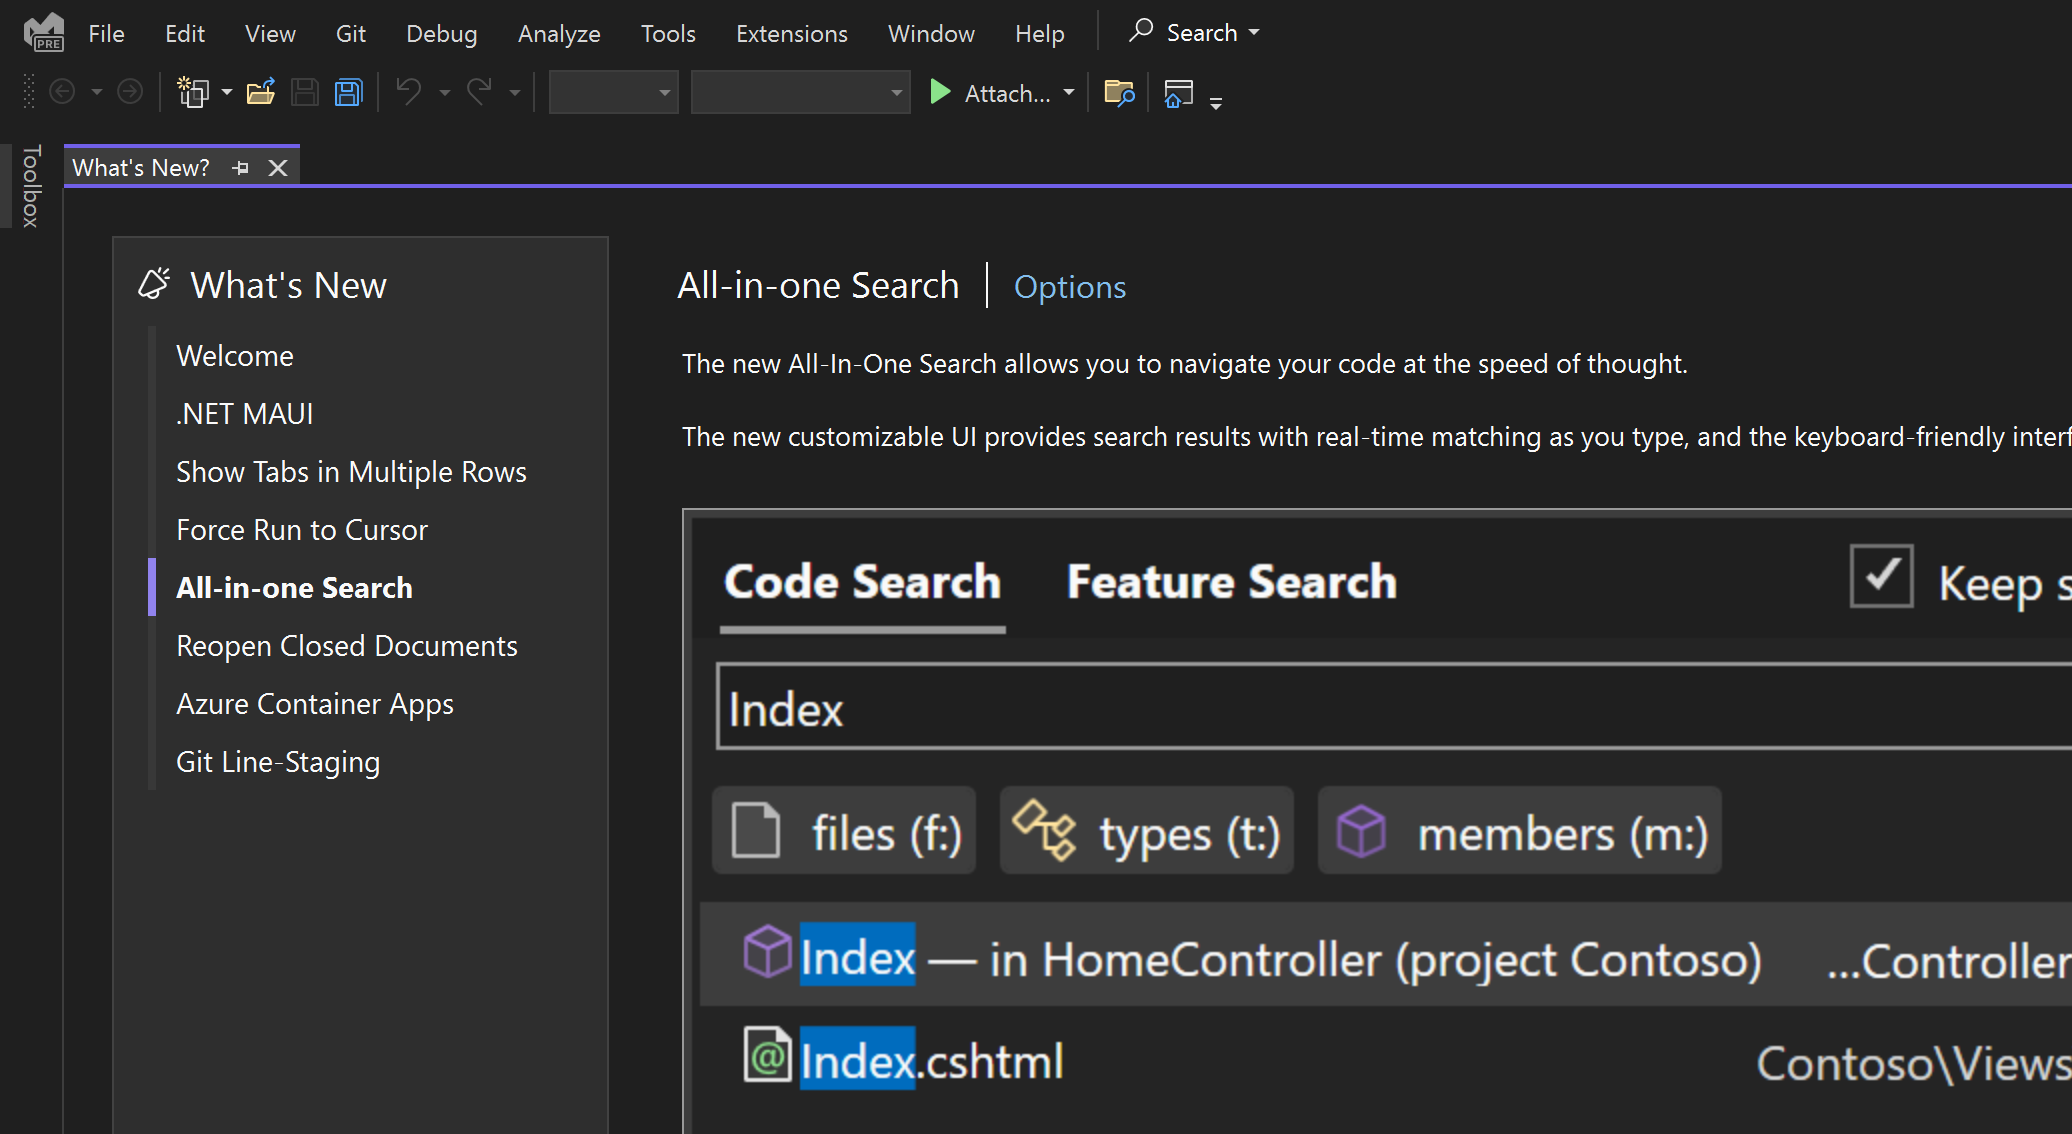 Visual Studio 2022 Preview 4 is now available! - Visual Studio Blog